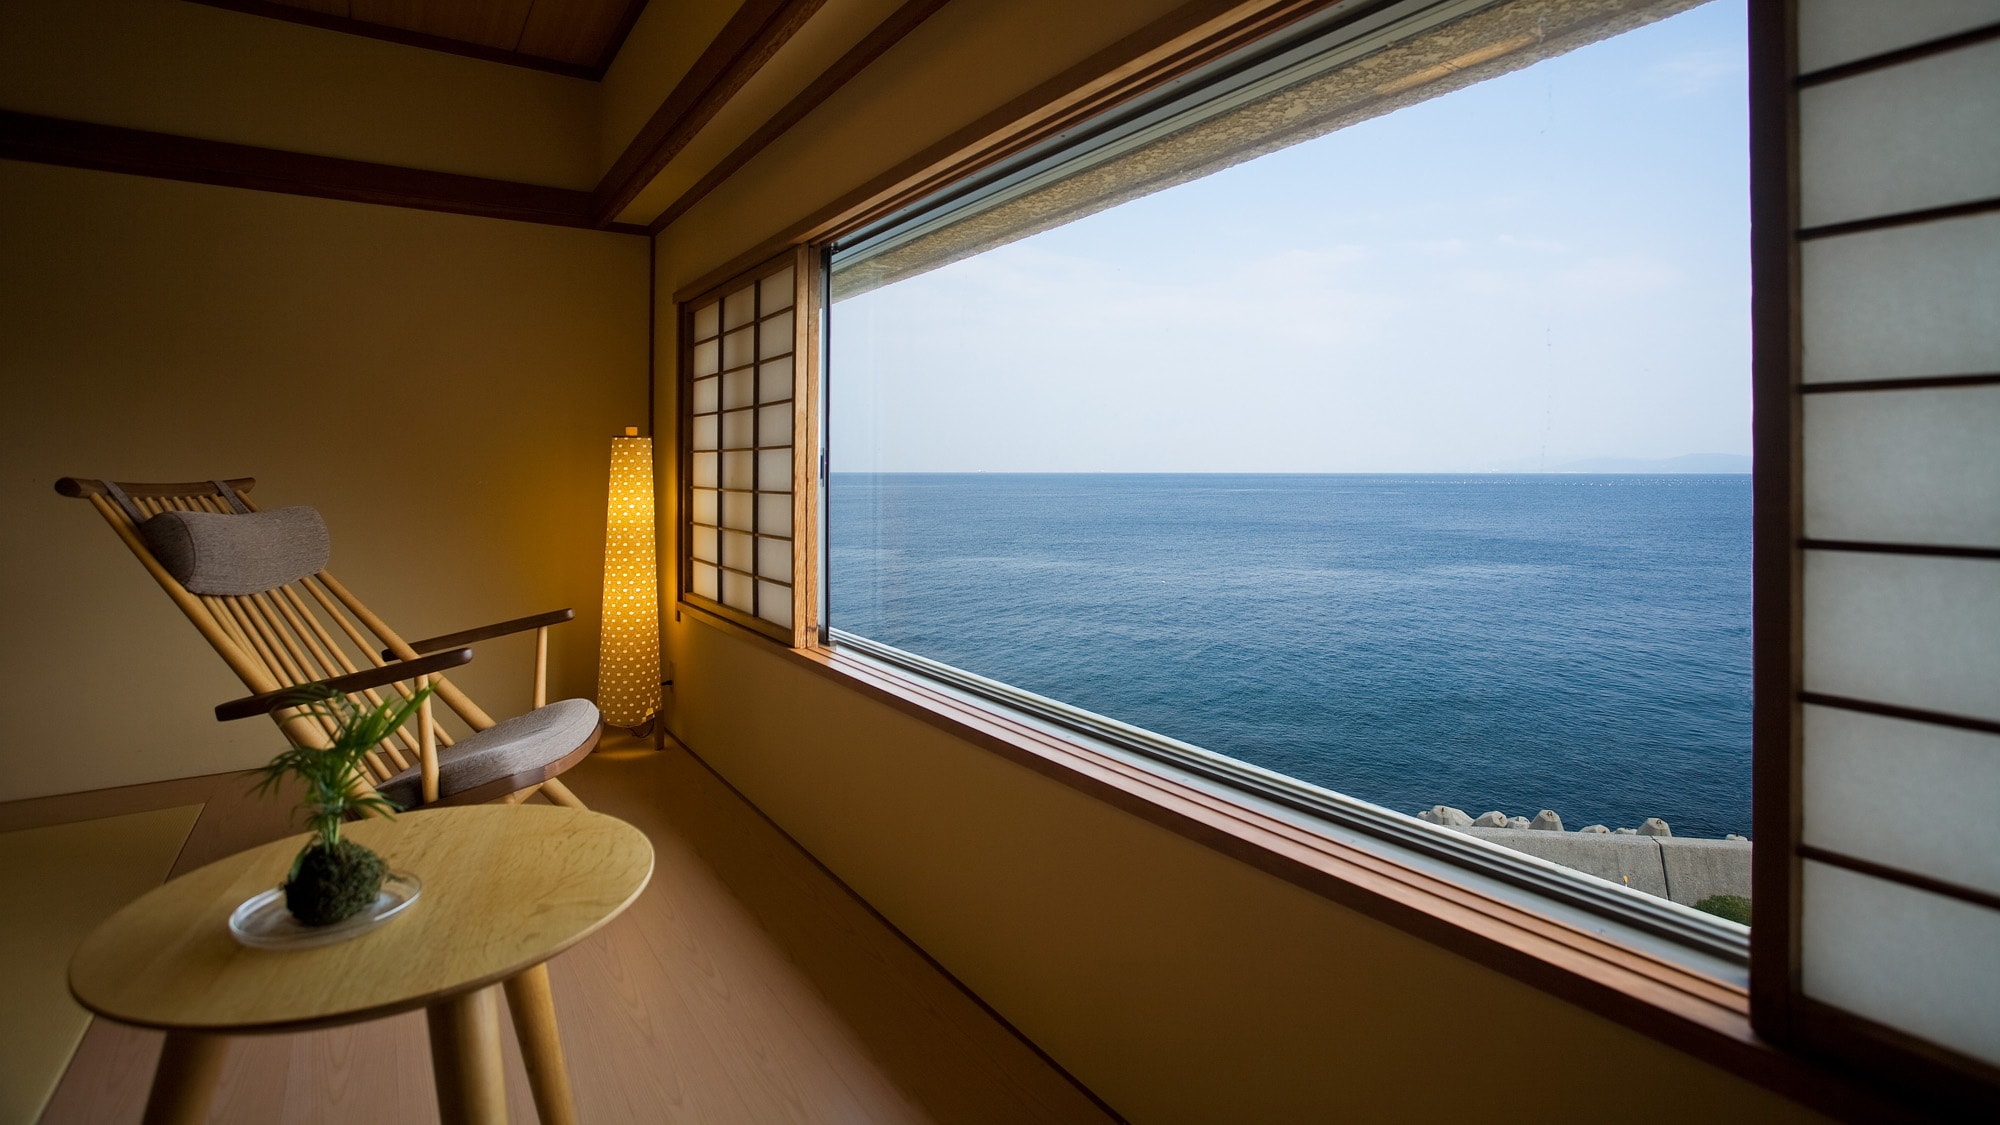 Ocean view from Japanese-style room (example)